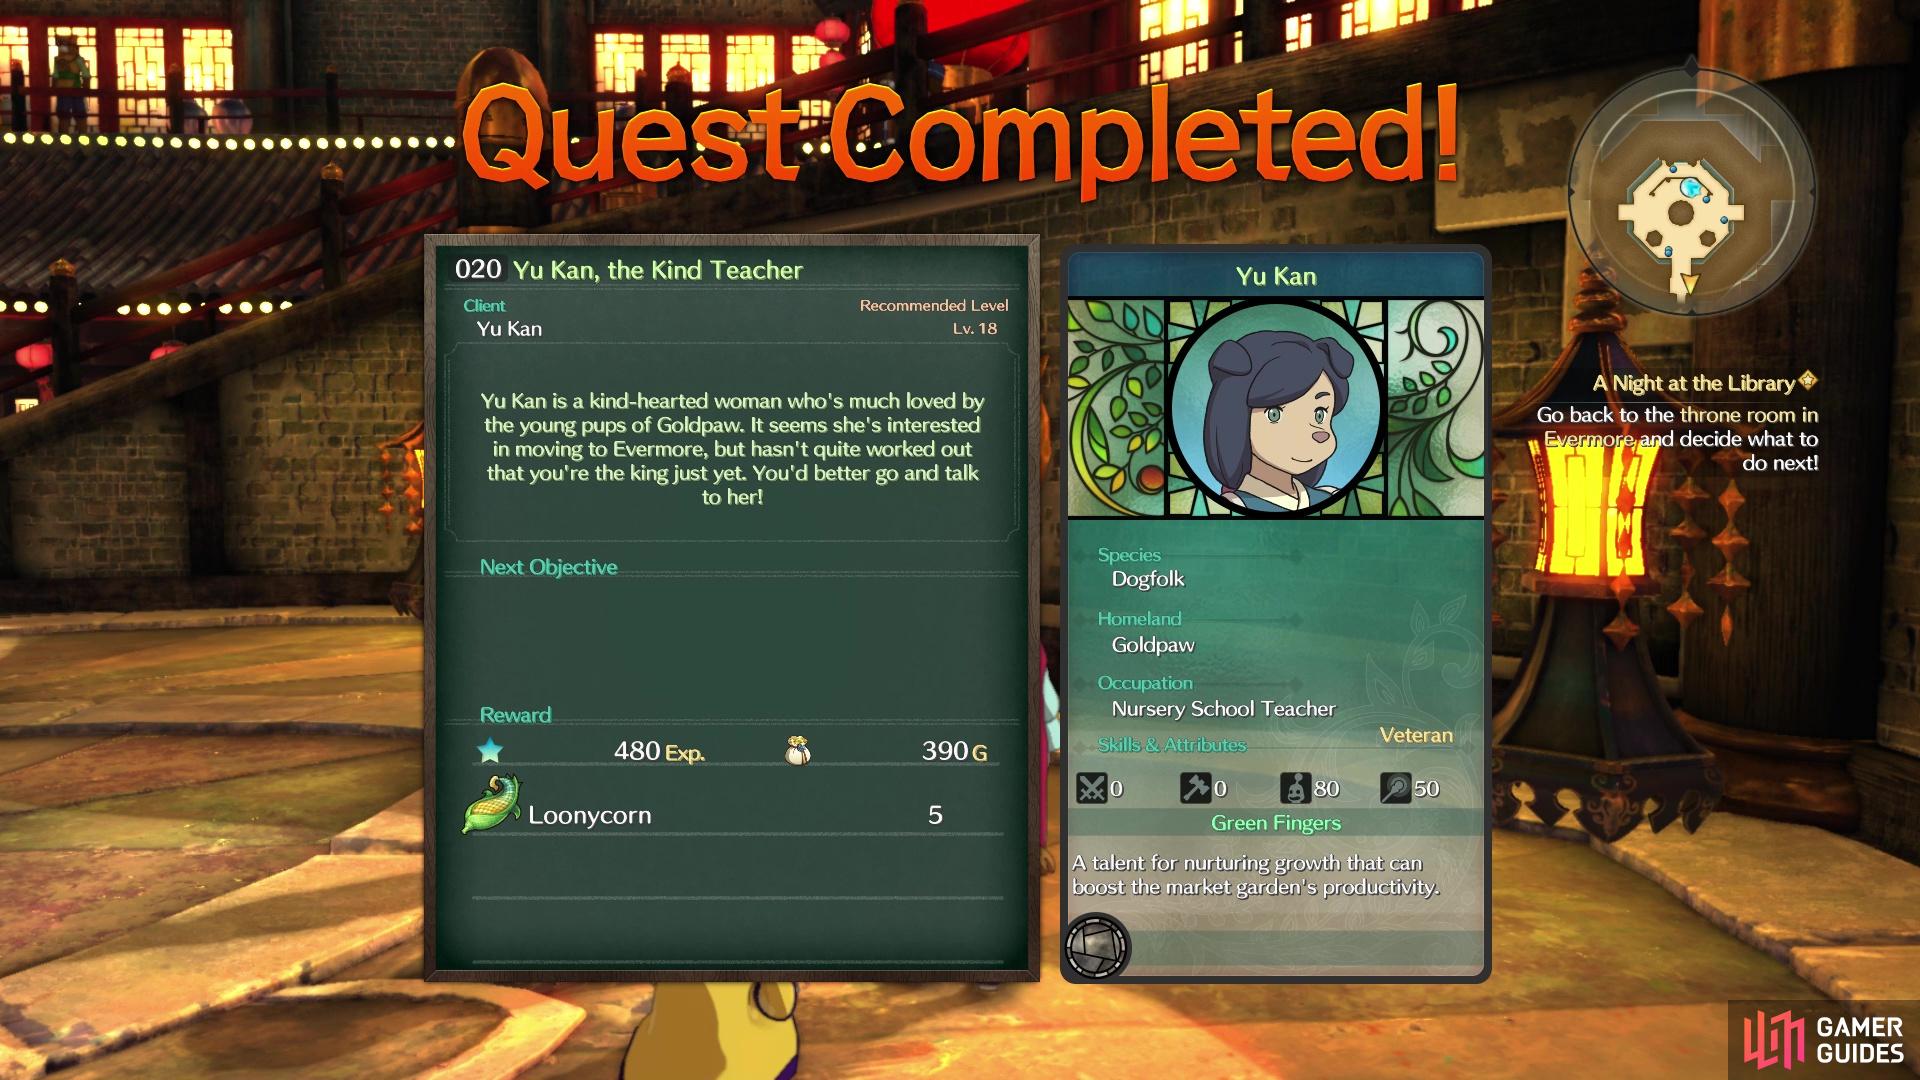 Sidequest 020 gives you the Loonycorn needed to finish Alice’s quest